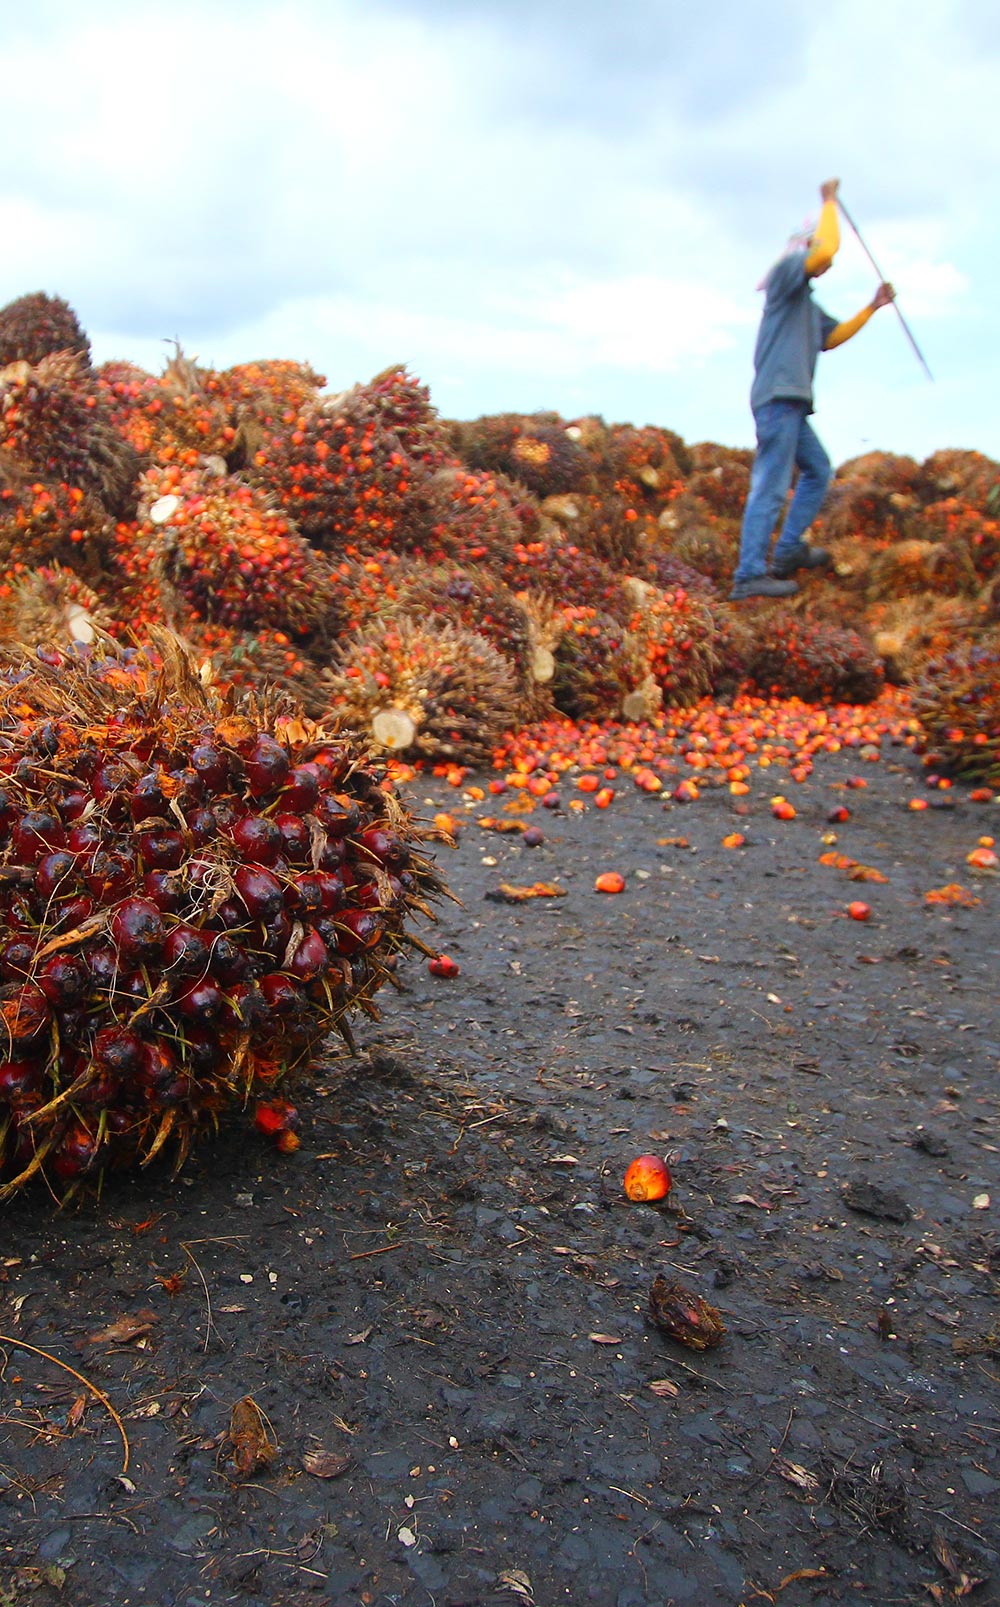 Palm fruit harvesting in Indonesia.